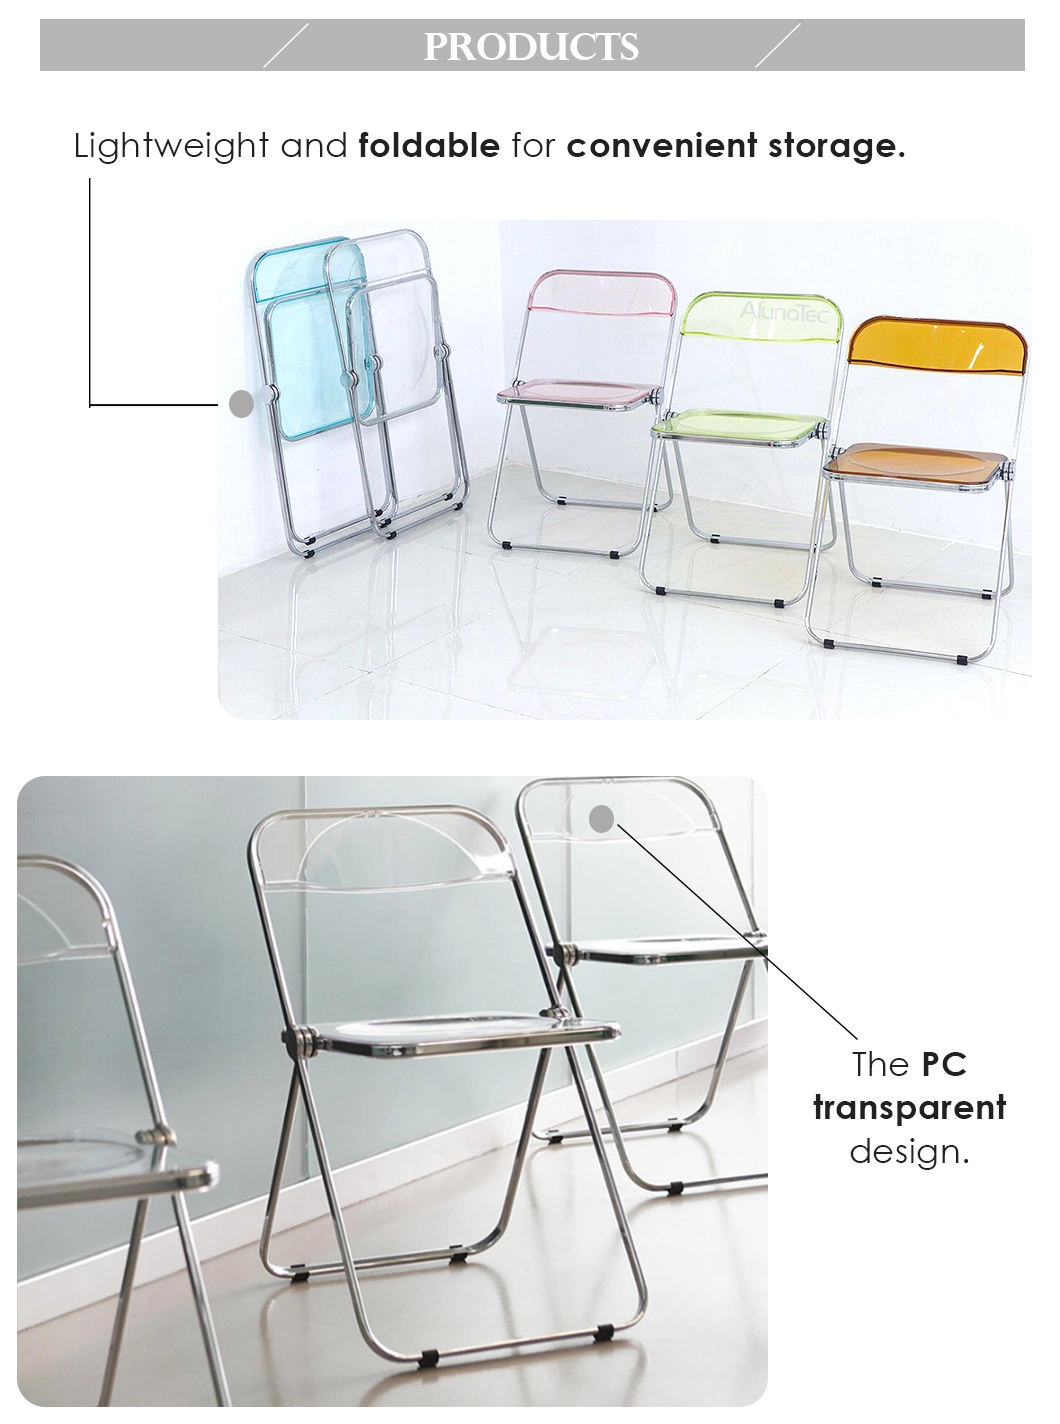 Stylish Plastic Plia Fold Chairs in Metal Chromed for Dining/Kitchen/Party/Office